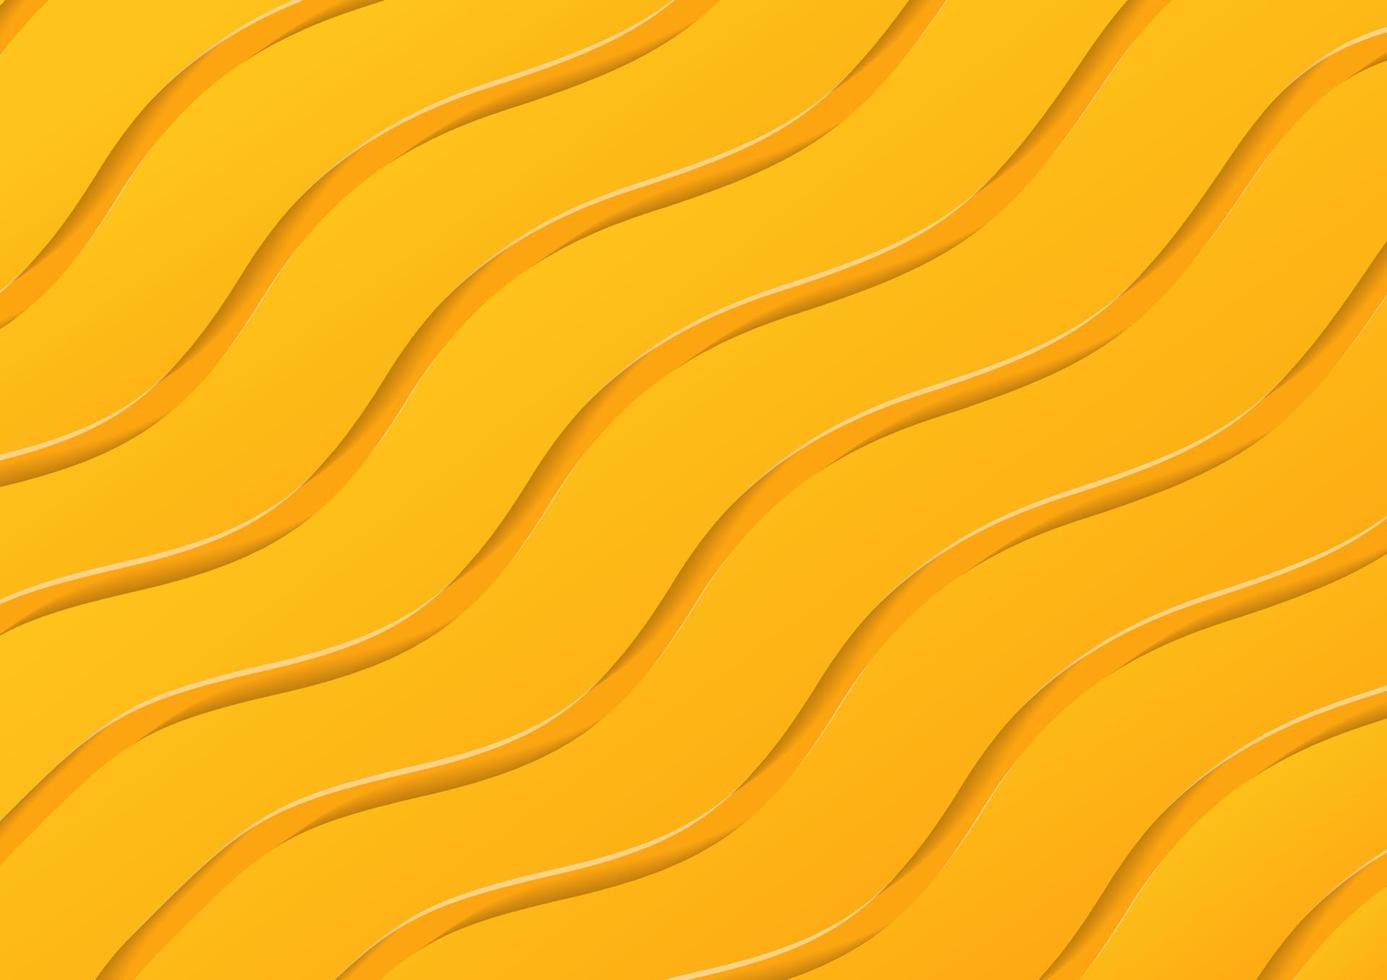 Abstract modern yellow stripes background concept vector